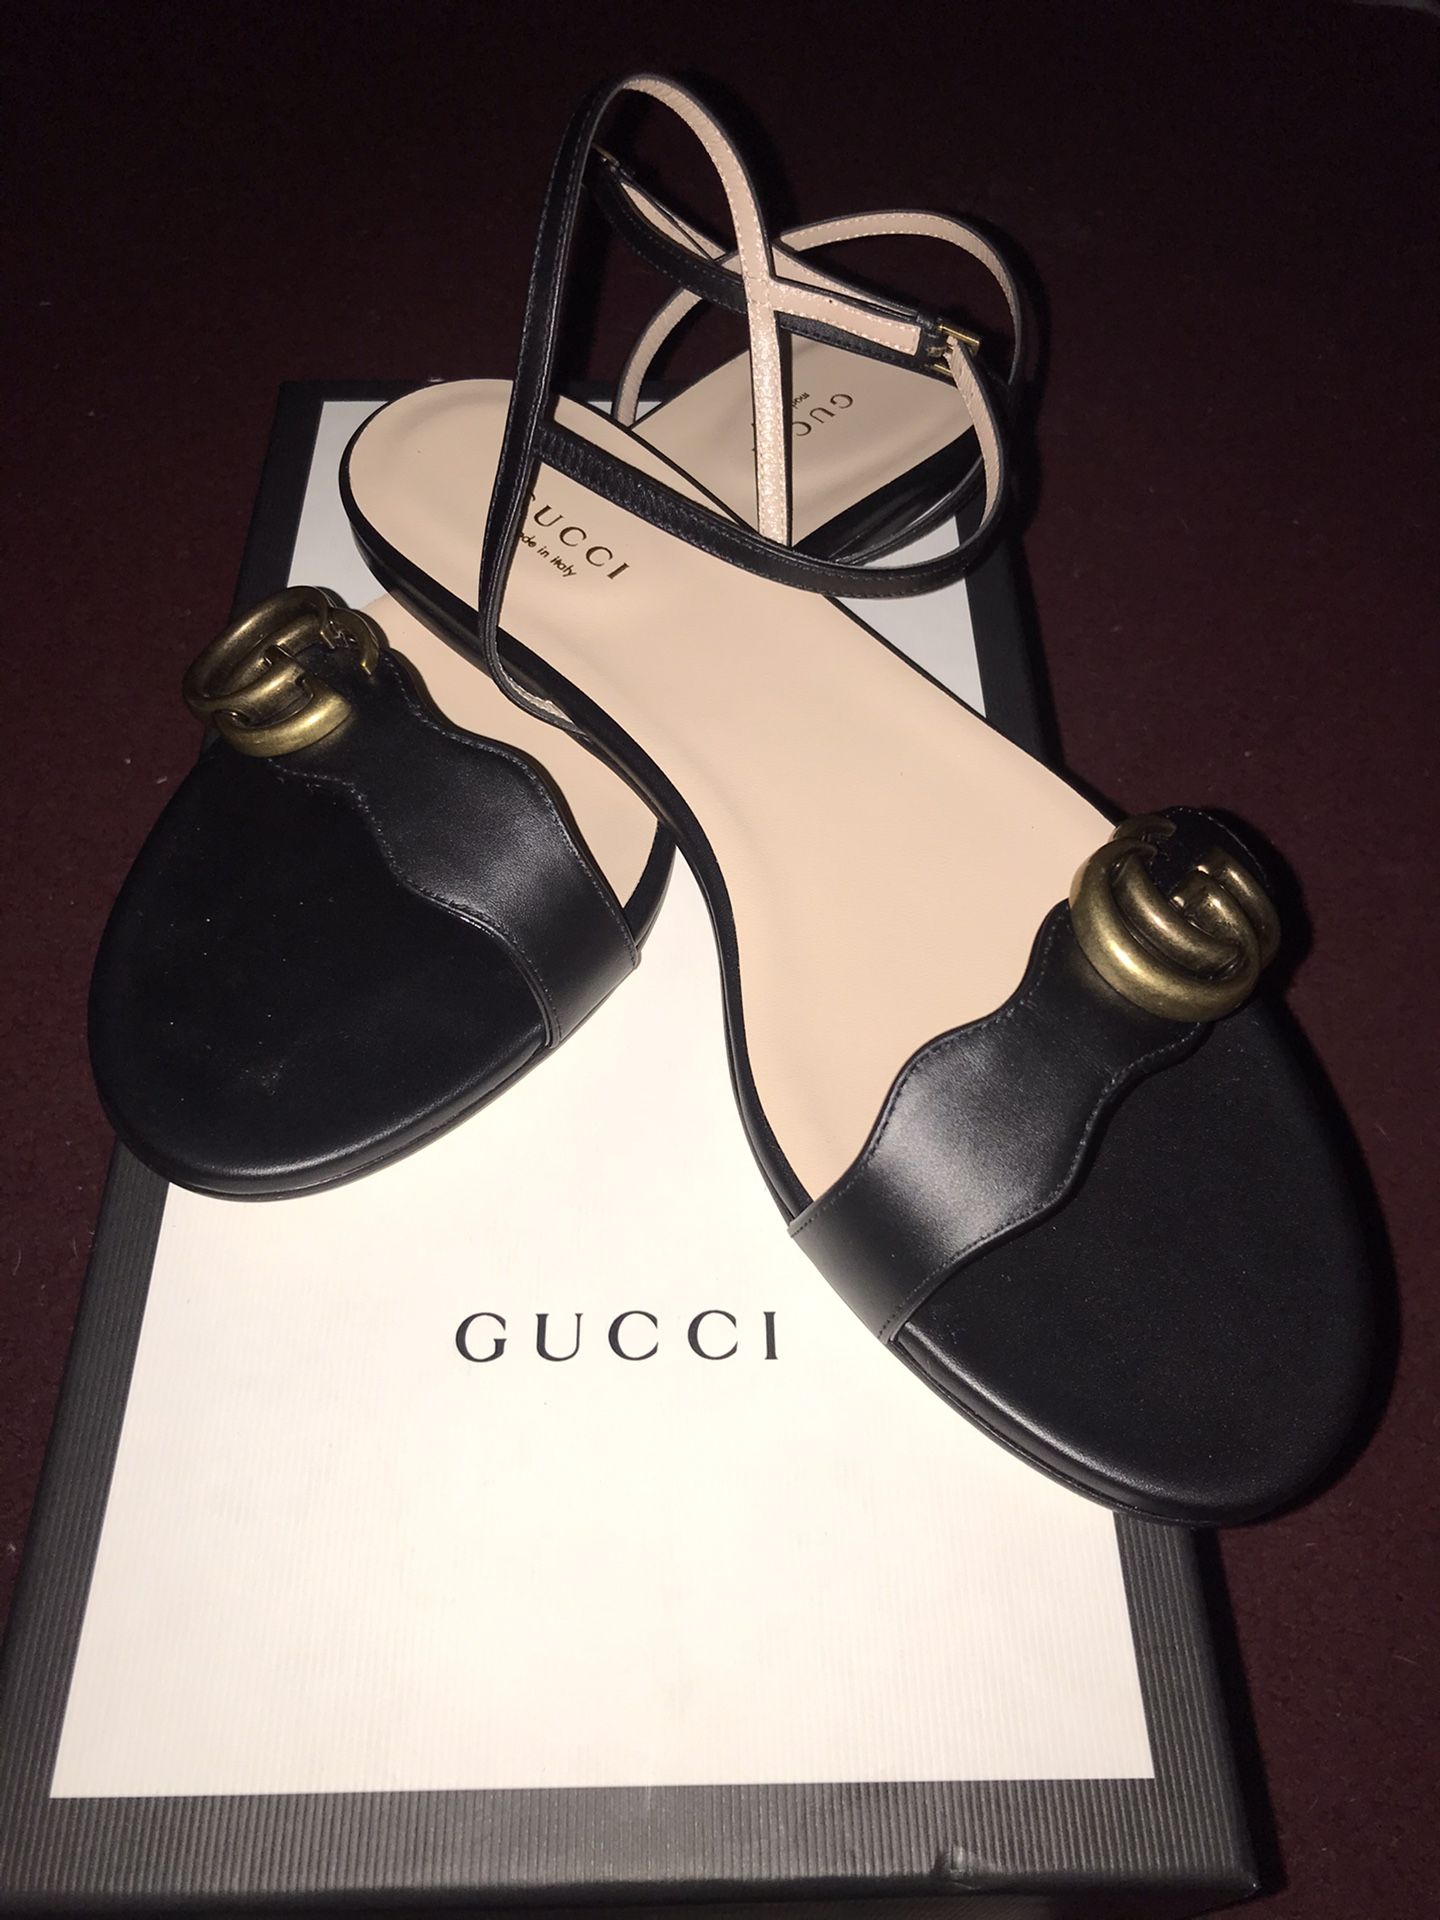 Gucci Women’s sandal with Double G